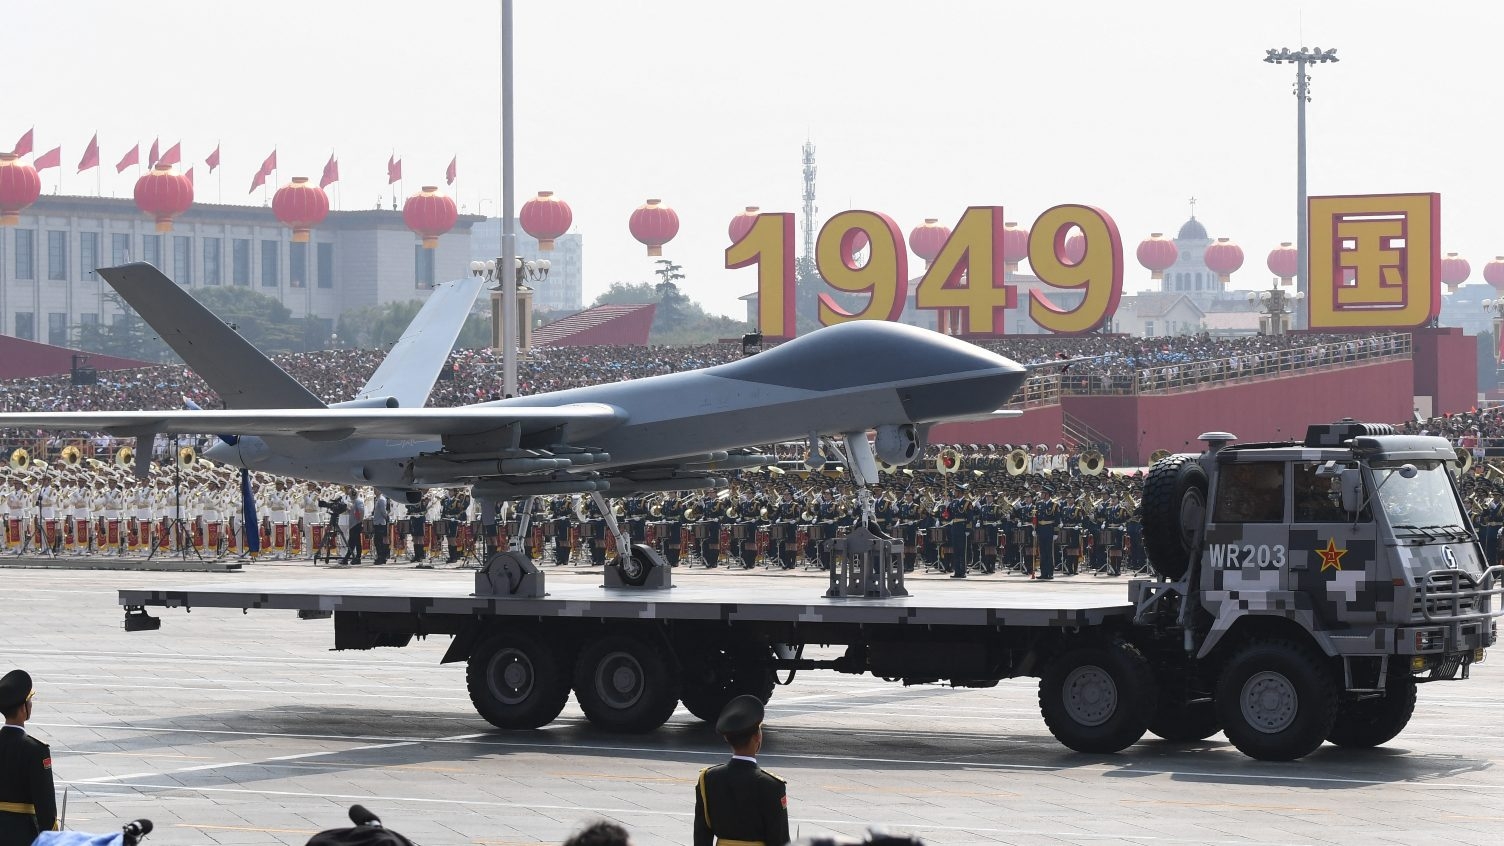 A Chinese unmanned aerial vehicle is presented during a military parade at Tiananmen Square in Beijing on 1 October 2019.